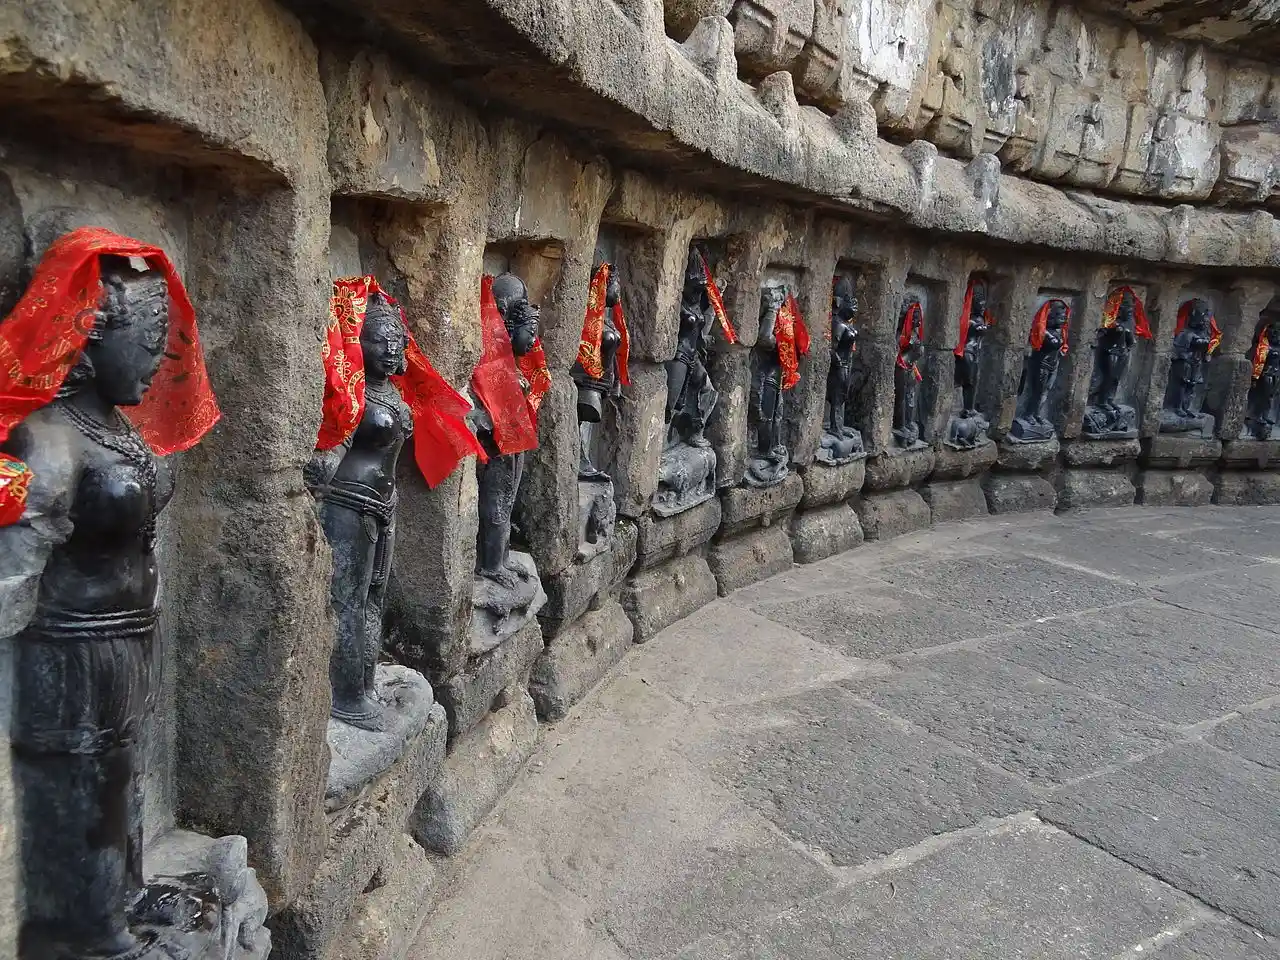 Tantric Yoginis from Chausath Yogini Temple, Hirapur. Image Source: Wikimedia Commons